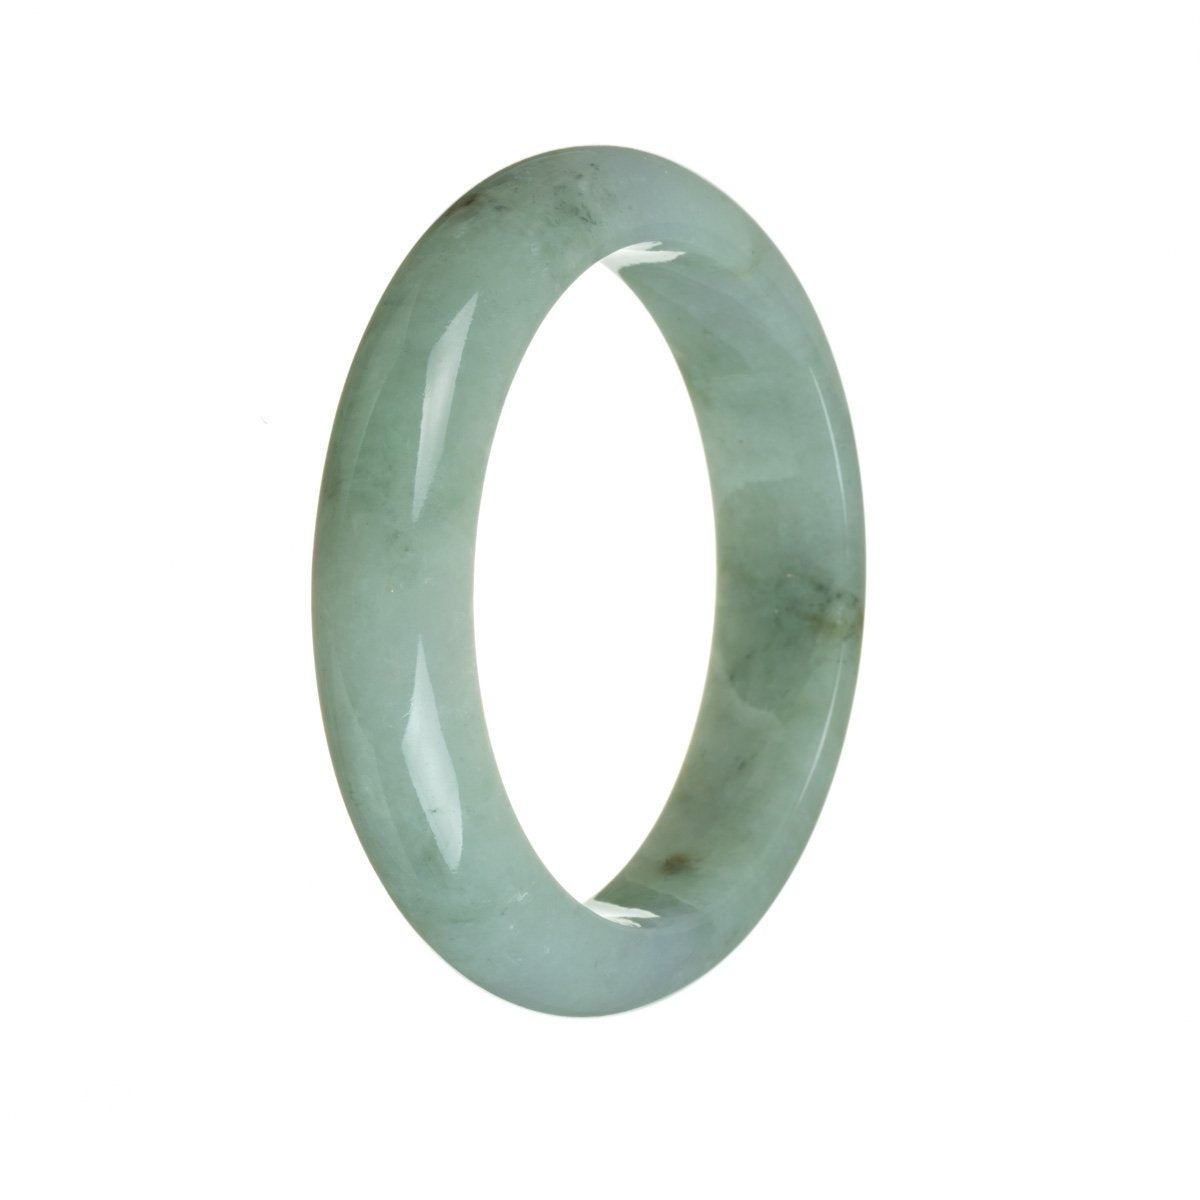 A beautiful light green Burma Jade bracelet with a semi-round shape, measuring 60mm in size. The bracelet is made of genuine and natural jade, showcasing its exquisite beauty. Perfect for adding a touch of elegance to any outfit.